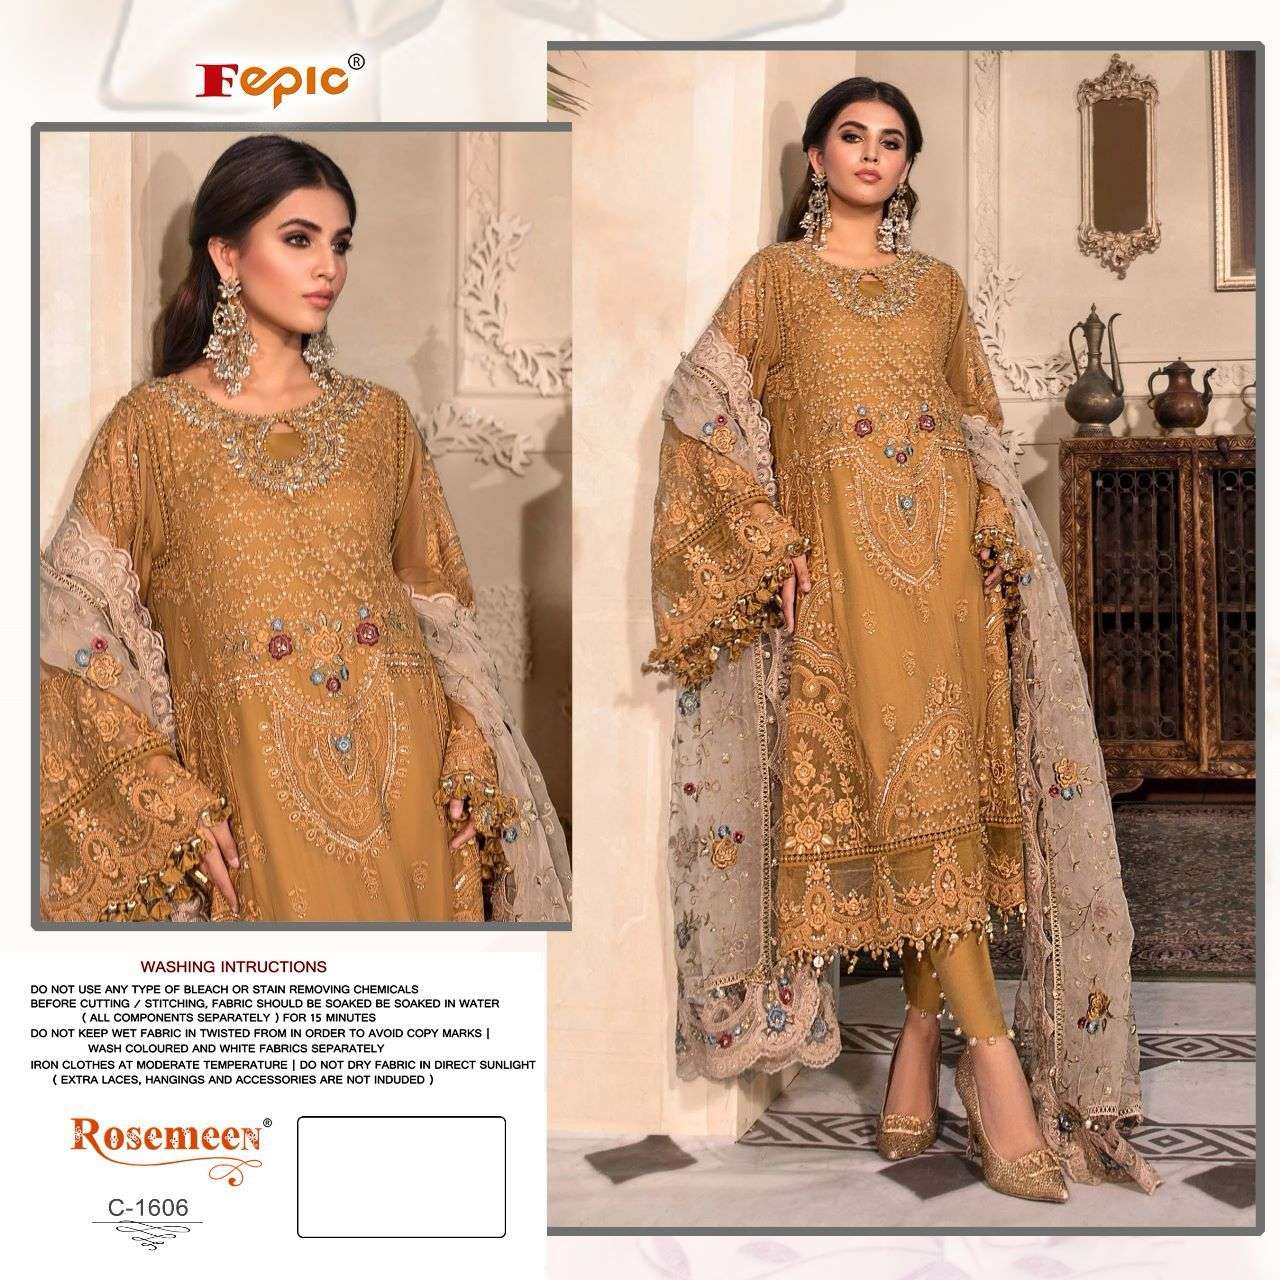 Fepic Rosemeen 1606 Organza With EMbroidery work pakistani s...